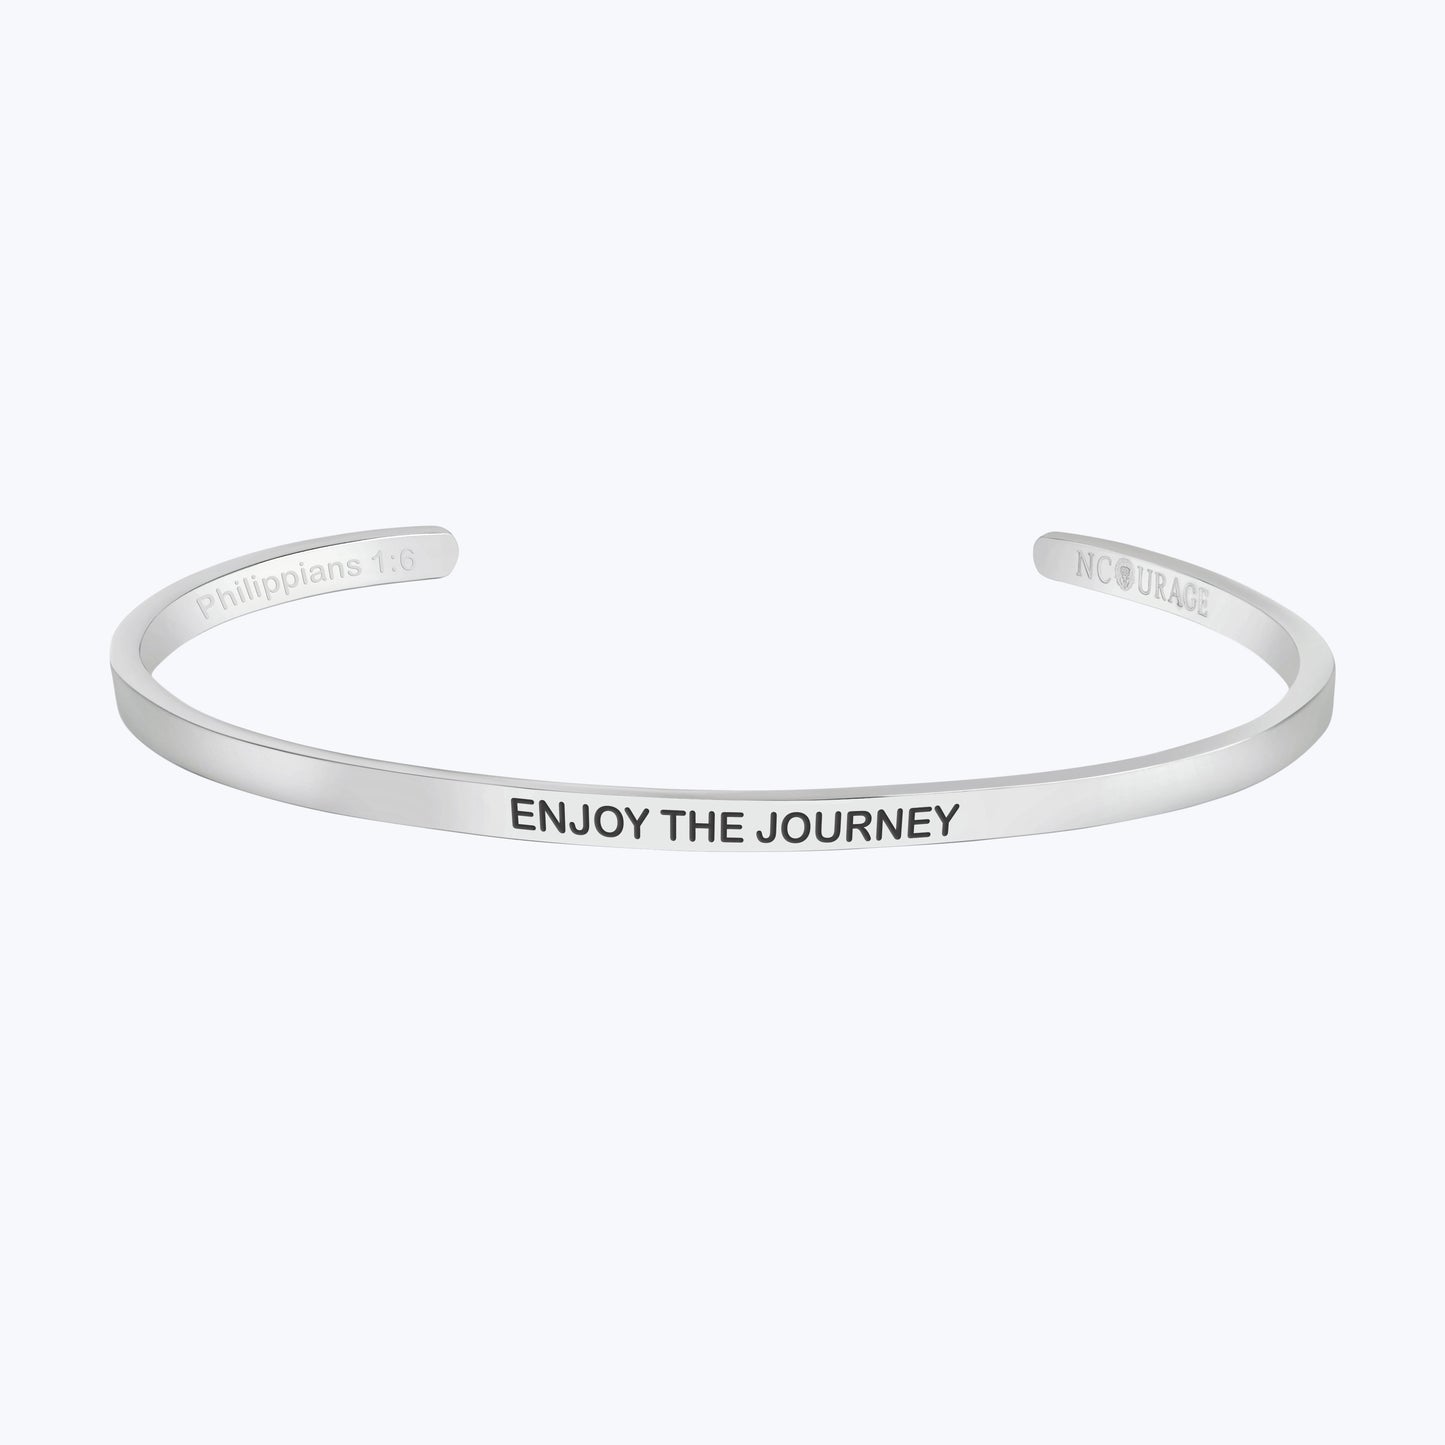 ENJOY THE JOURNEY - NCOURAGE Bands and Bracelets